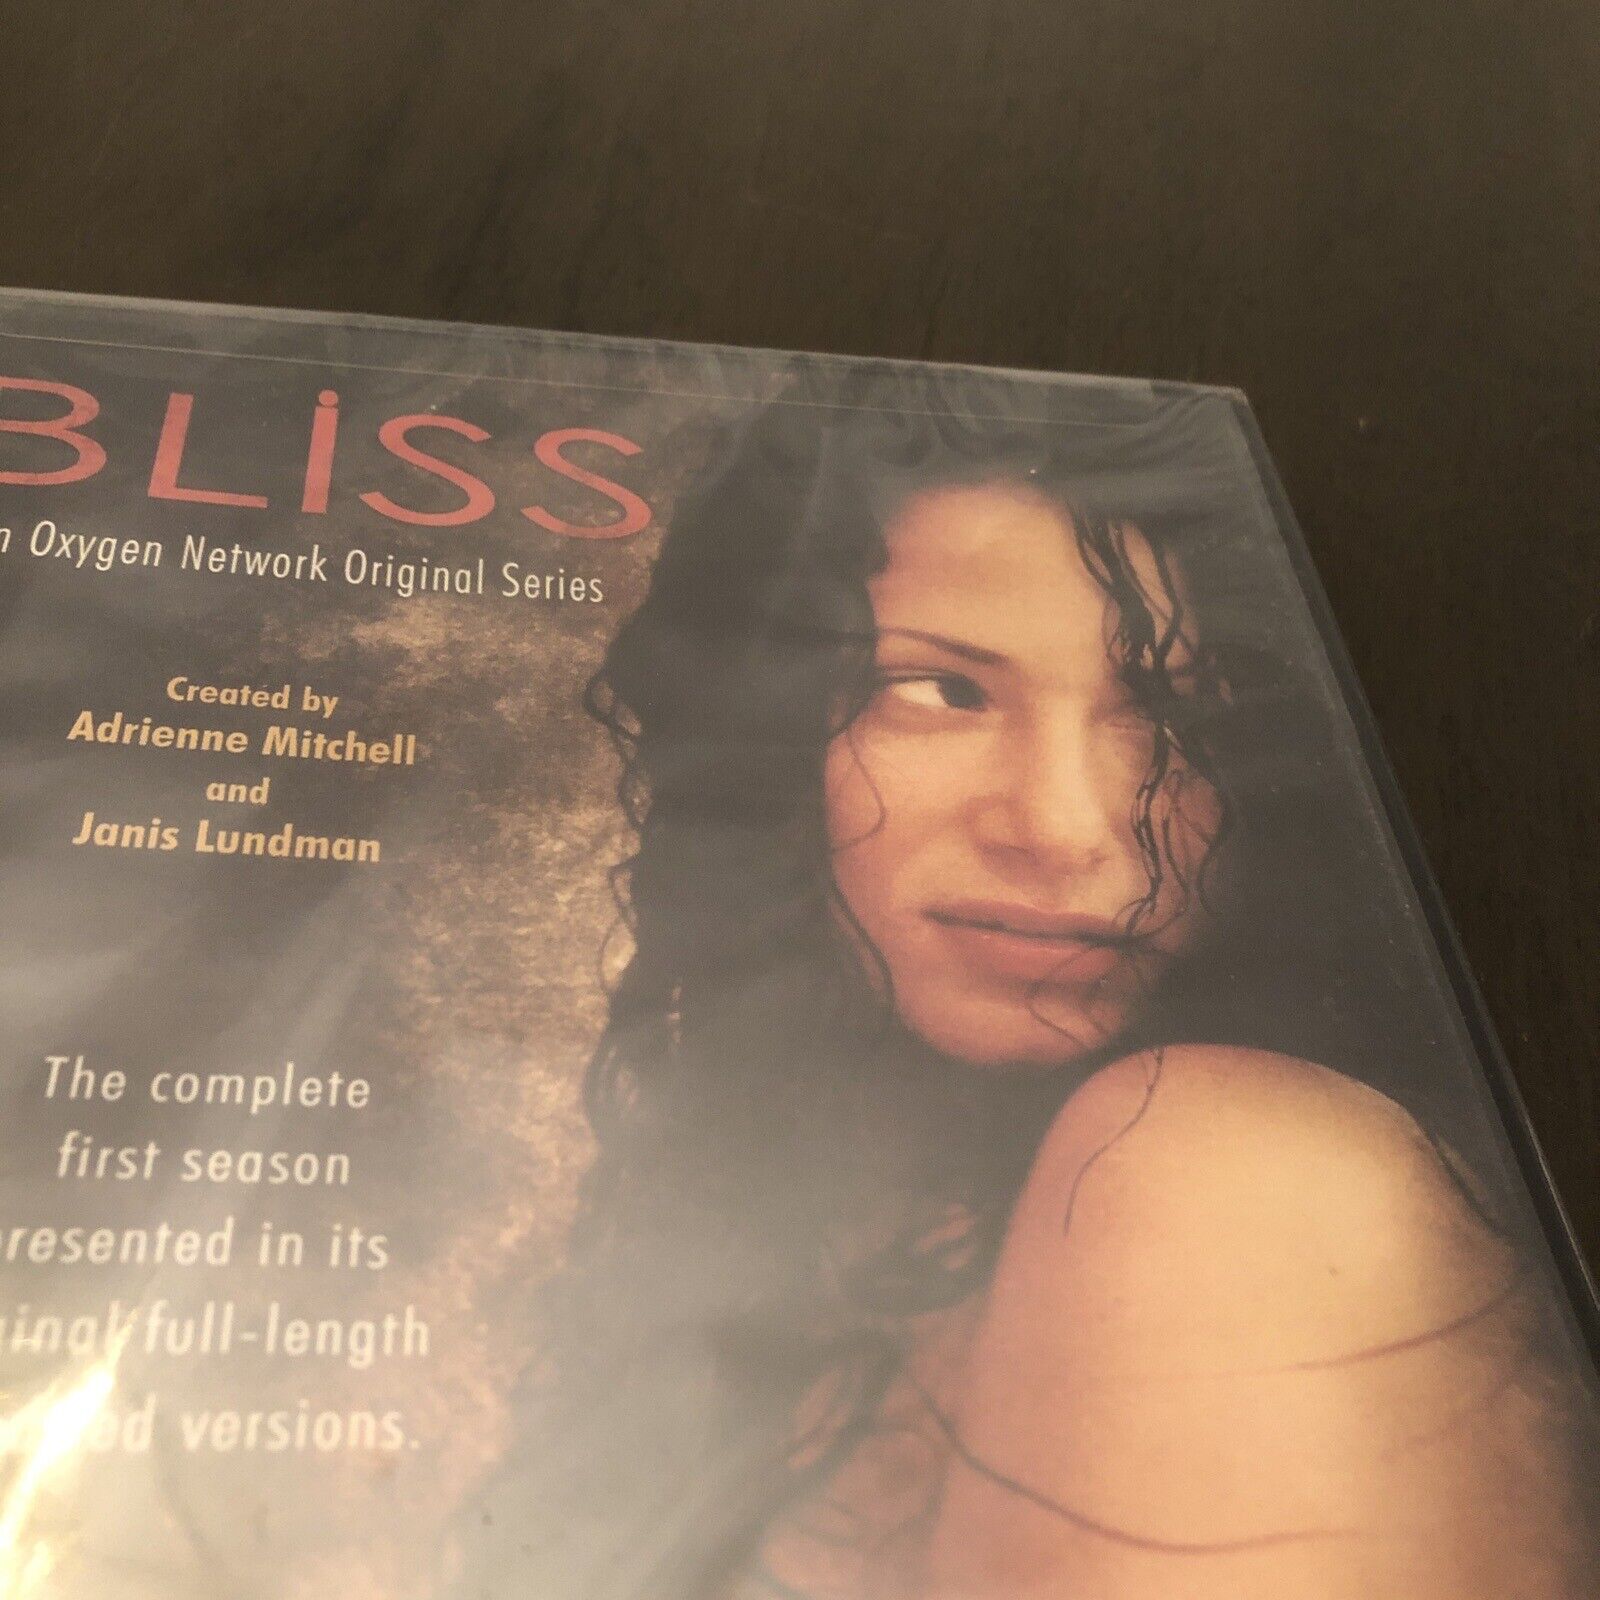 dana mcnulty recommends bliss tv show oxygen free pic